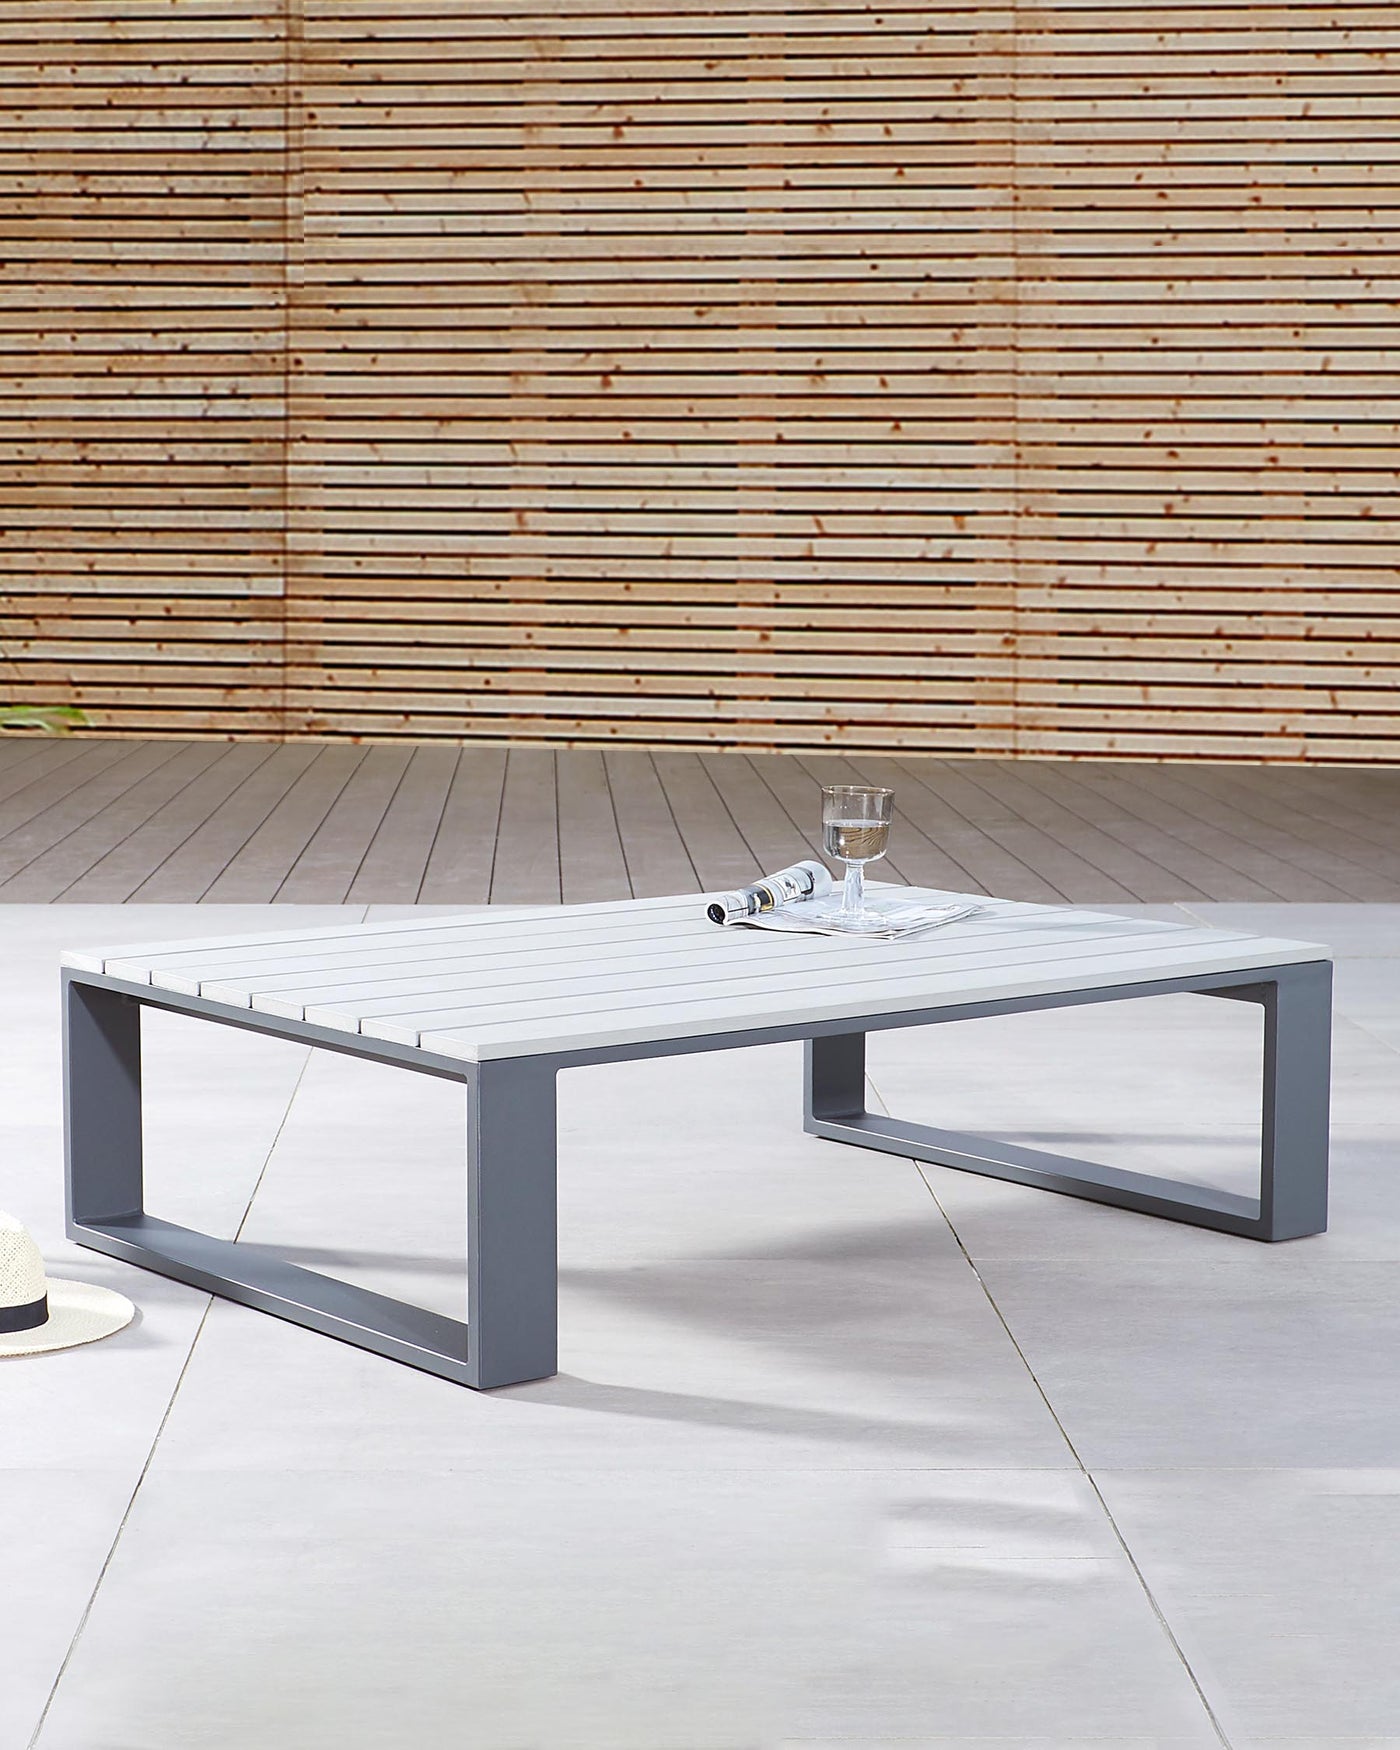 Modern low-profile outdoor coffee table with a white slatted tabletop and a minimalist grey metal frame.